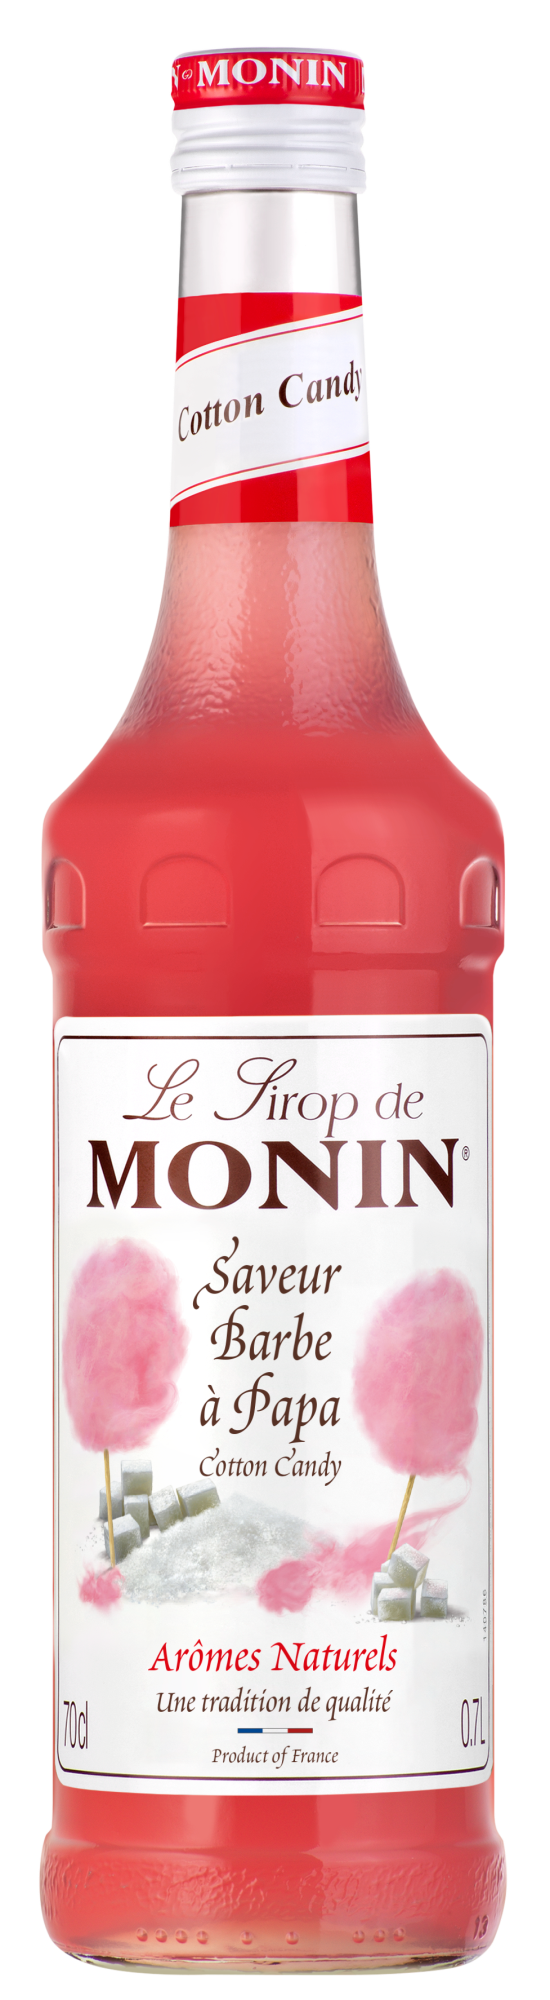 Buy MONIN Cotton Candy Syrup. It is inspired by cotton candy, a treat often enjoyed at county fairs, circuses & events.